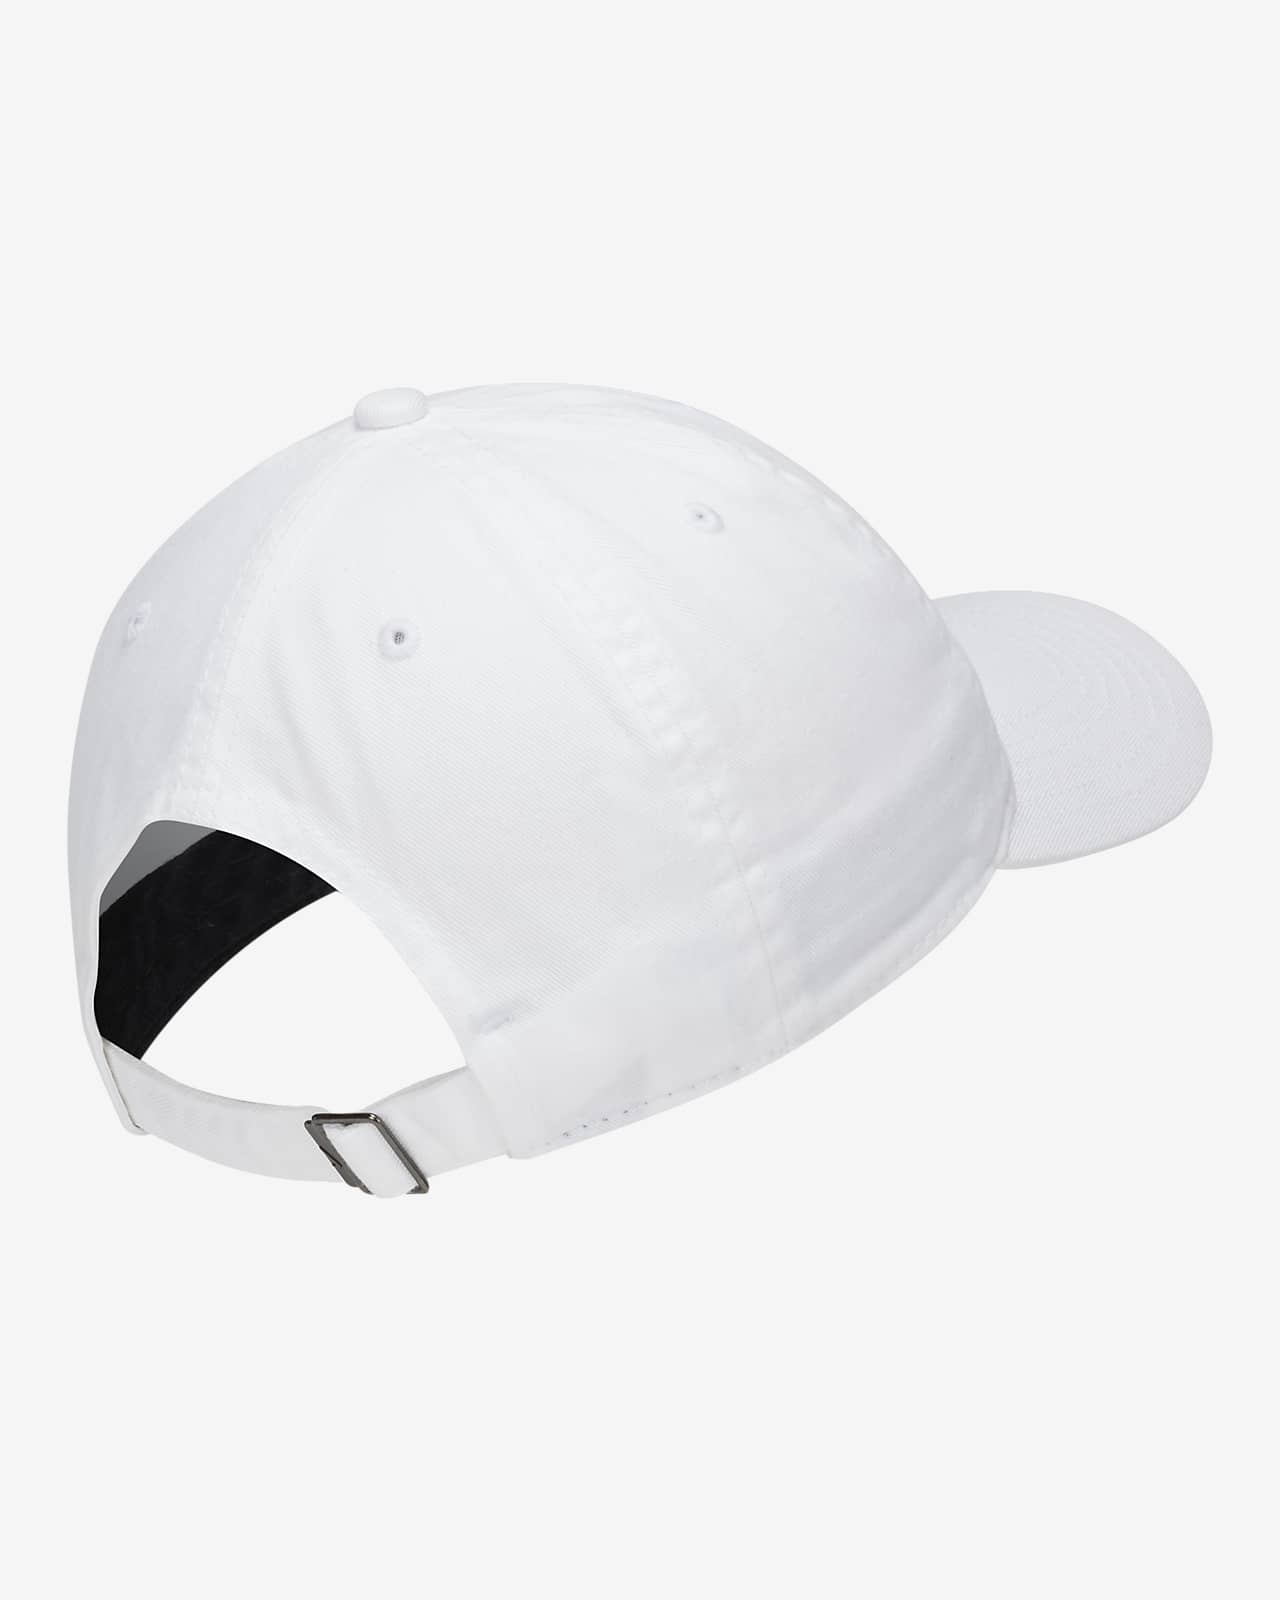 youth nike hat